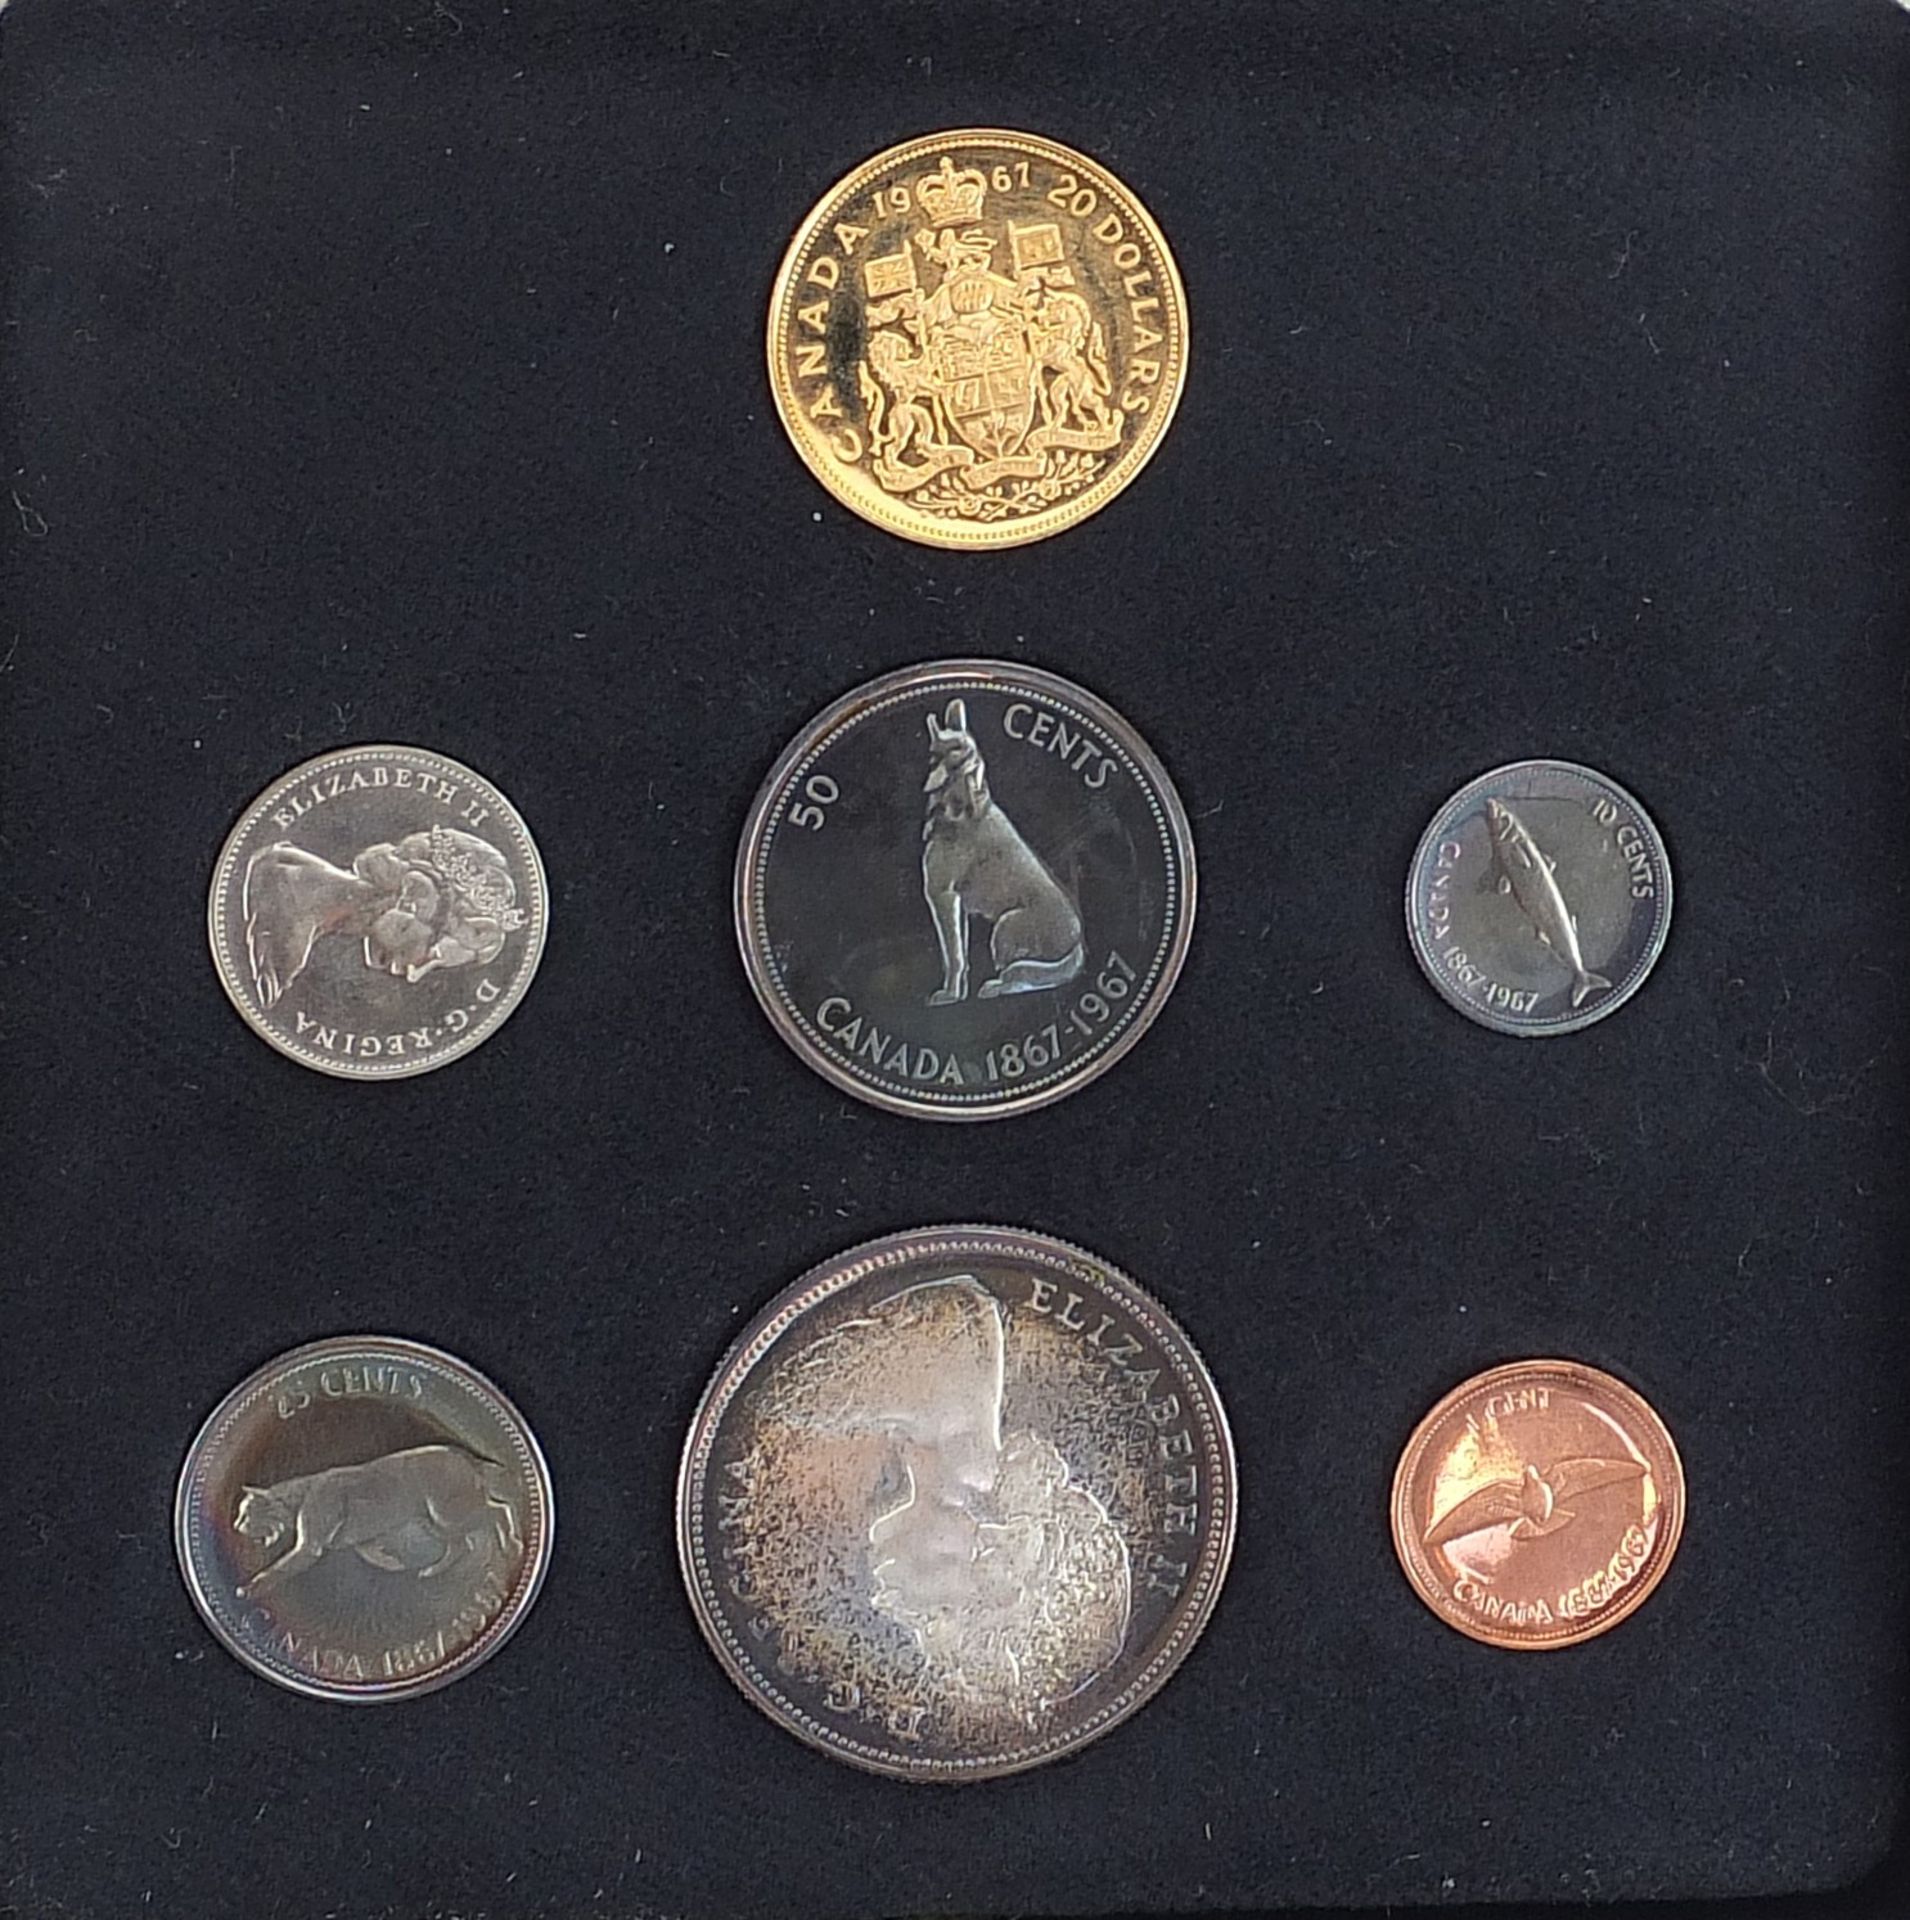 Royal Canadian Mint seven coin set including 1967 gold twenty dollars - this lot is sold without b - Image 2 of 3